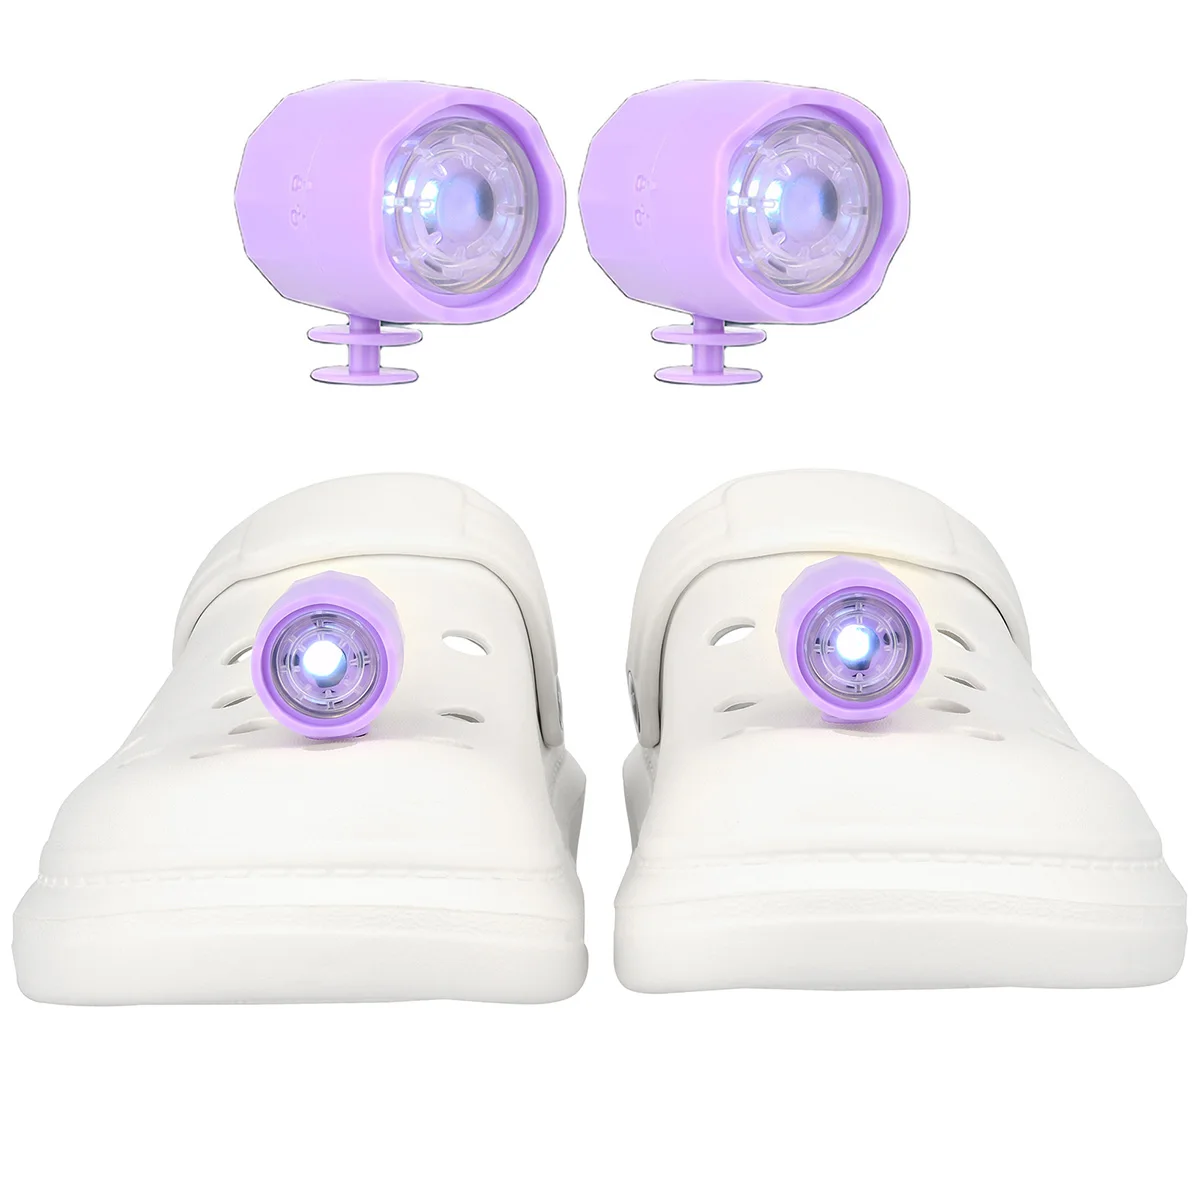 Mafiti Rechargeable Headlights For Croc Light Modes Shoes Charms Small Lights Funny Shoe Accessory Clog Sandals Shoes Decoration